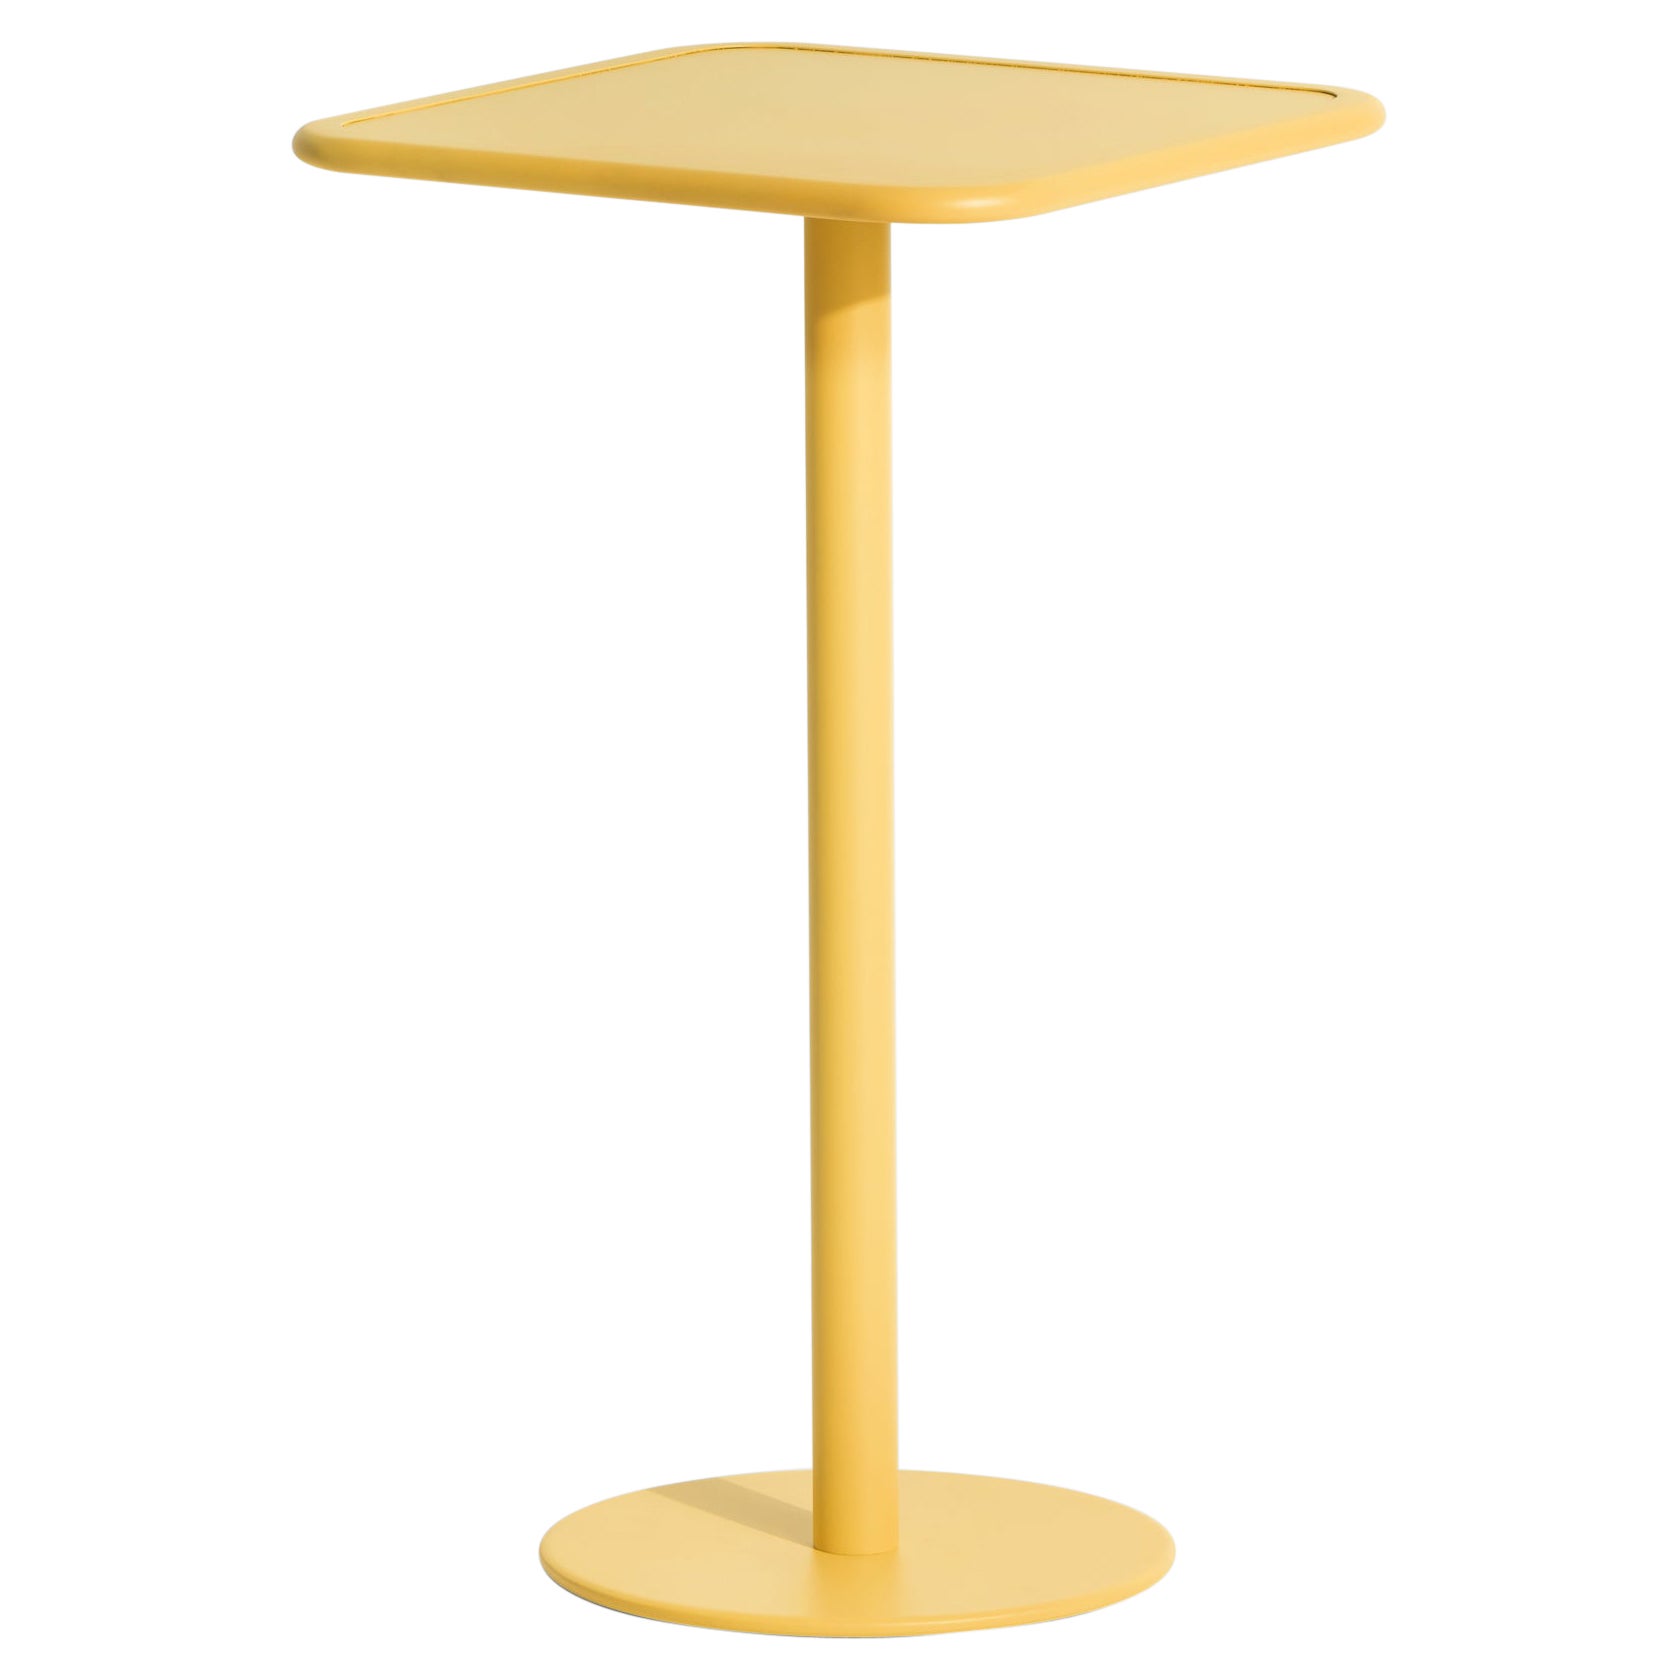 Petite Friture Week-End Square High Table in Saffron Aluminium, 2017 For Sale